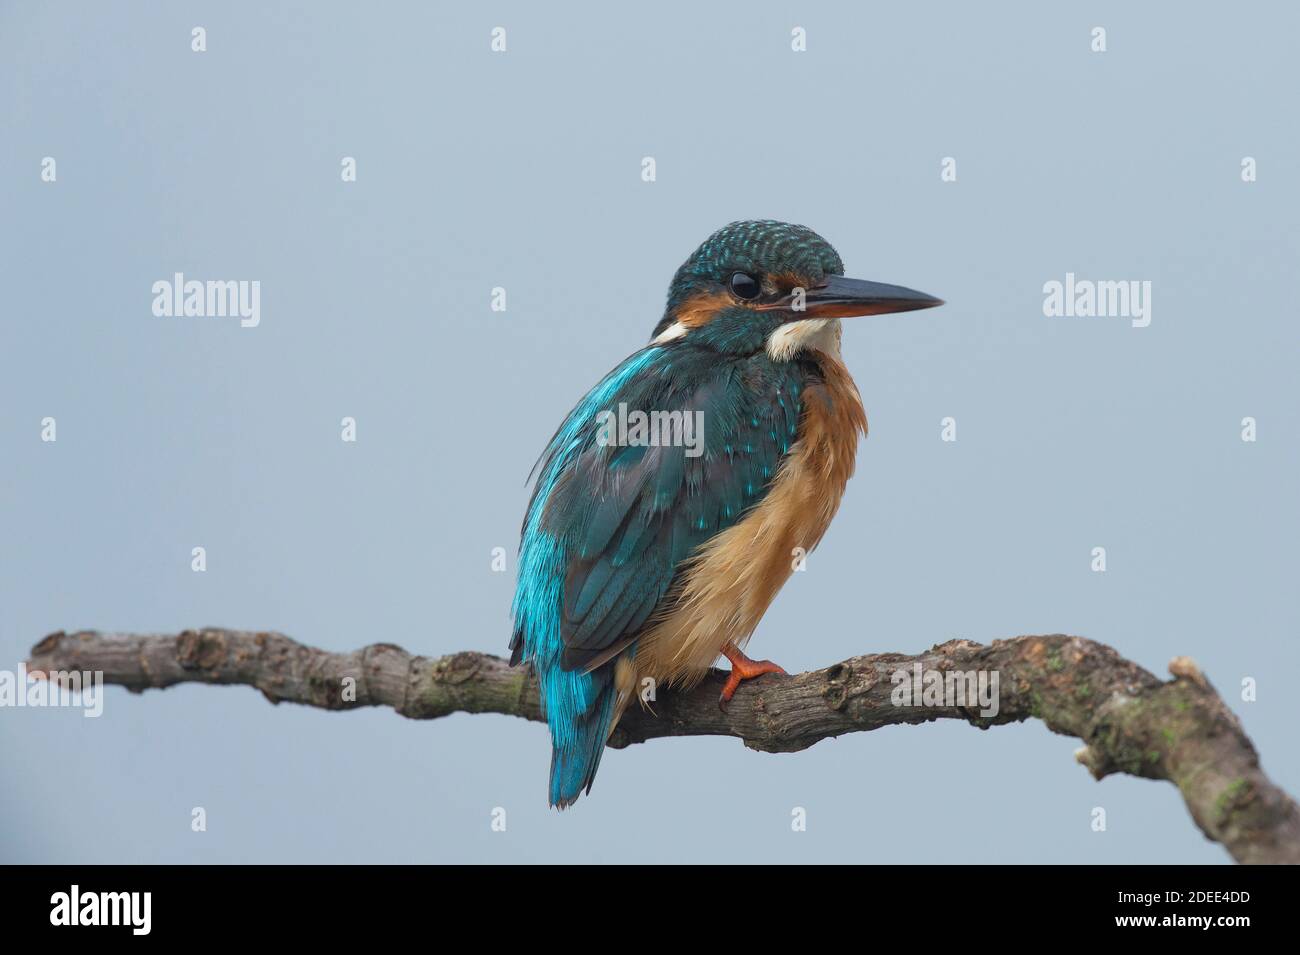 Common kingfisher, Alcedo atthis known as Blue Lightning, beginning day searching food (catching fish) at São Domingos river banks.Peniche. Portugal. Stock Photo